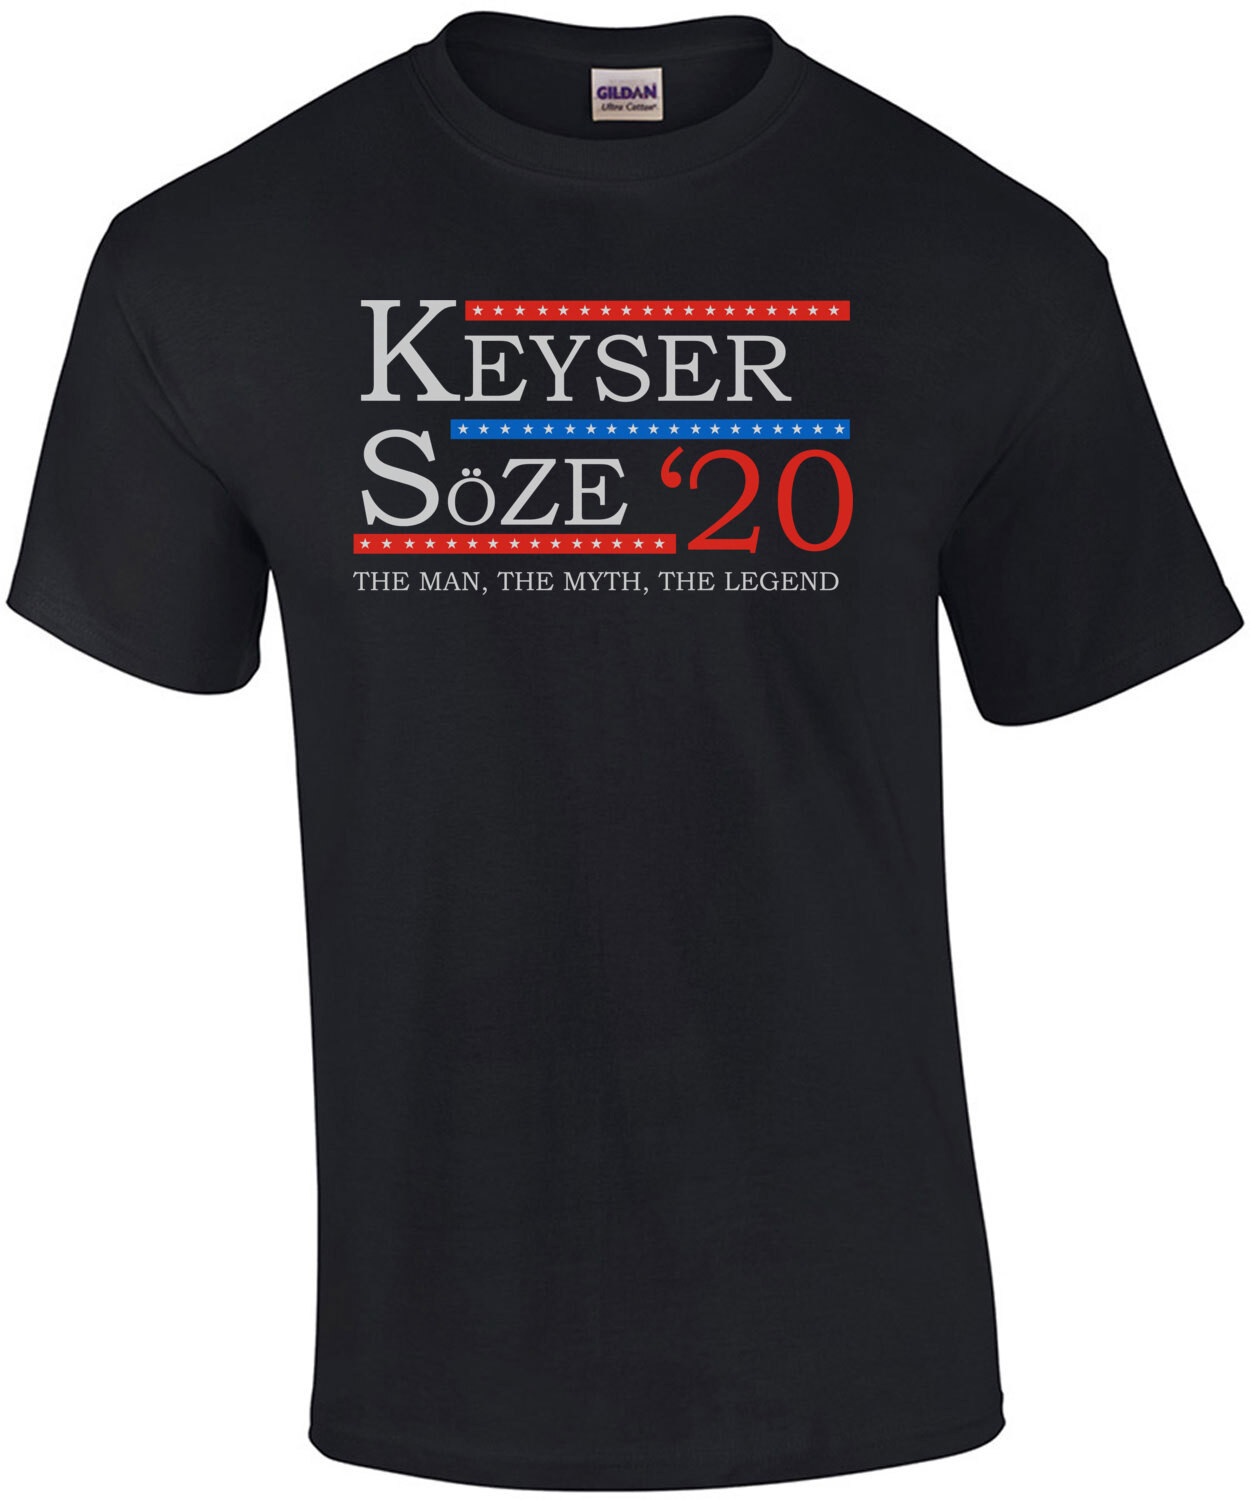 Keyser - Soze 2020 - The man, the myth, the legend - 2020 Election - The Usual Suspects 90's T-Shirt